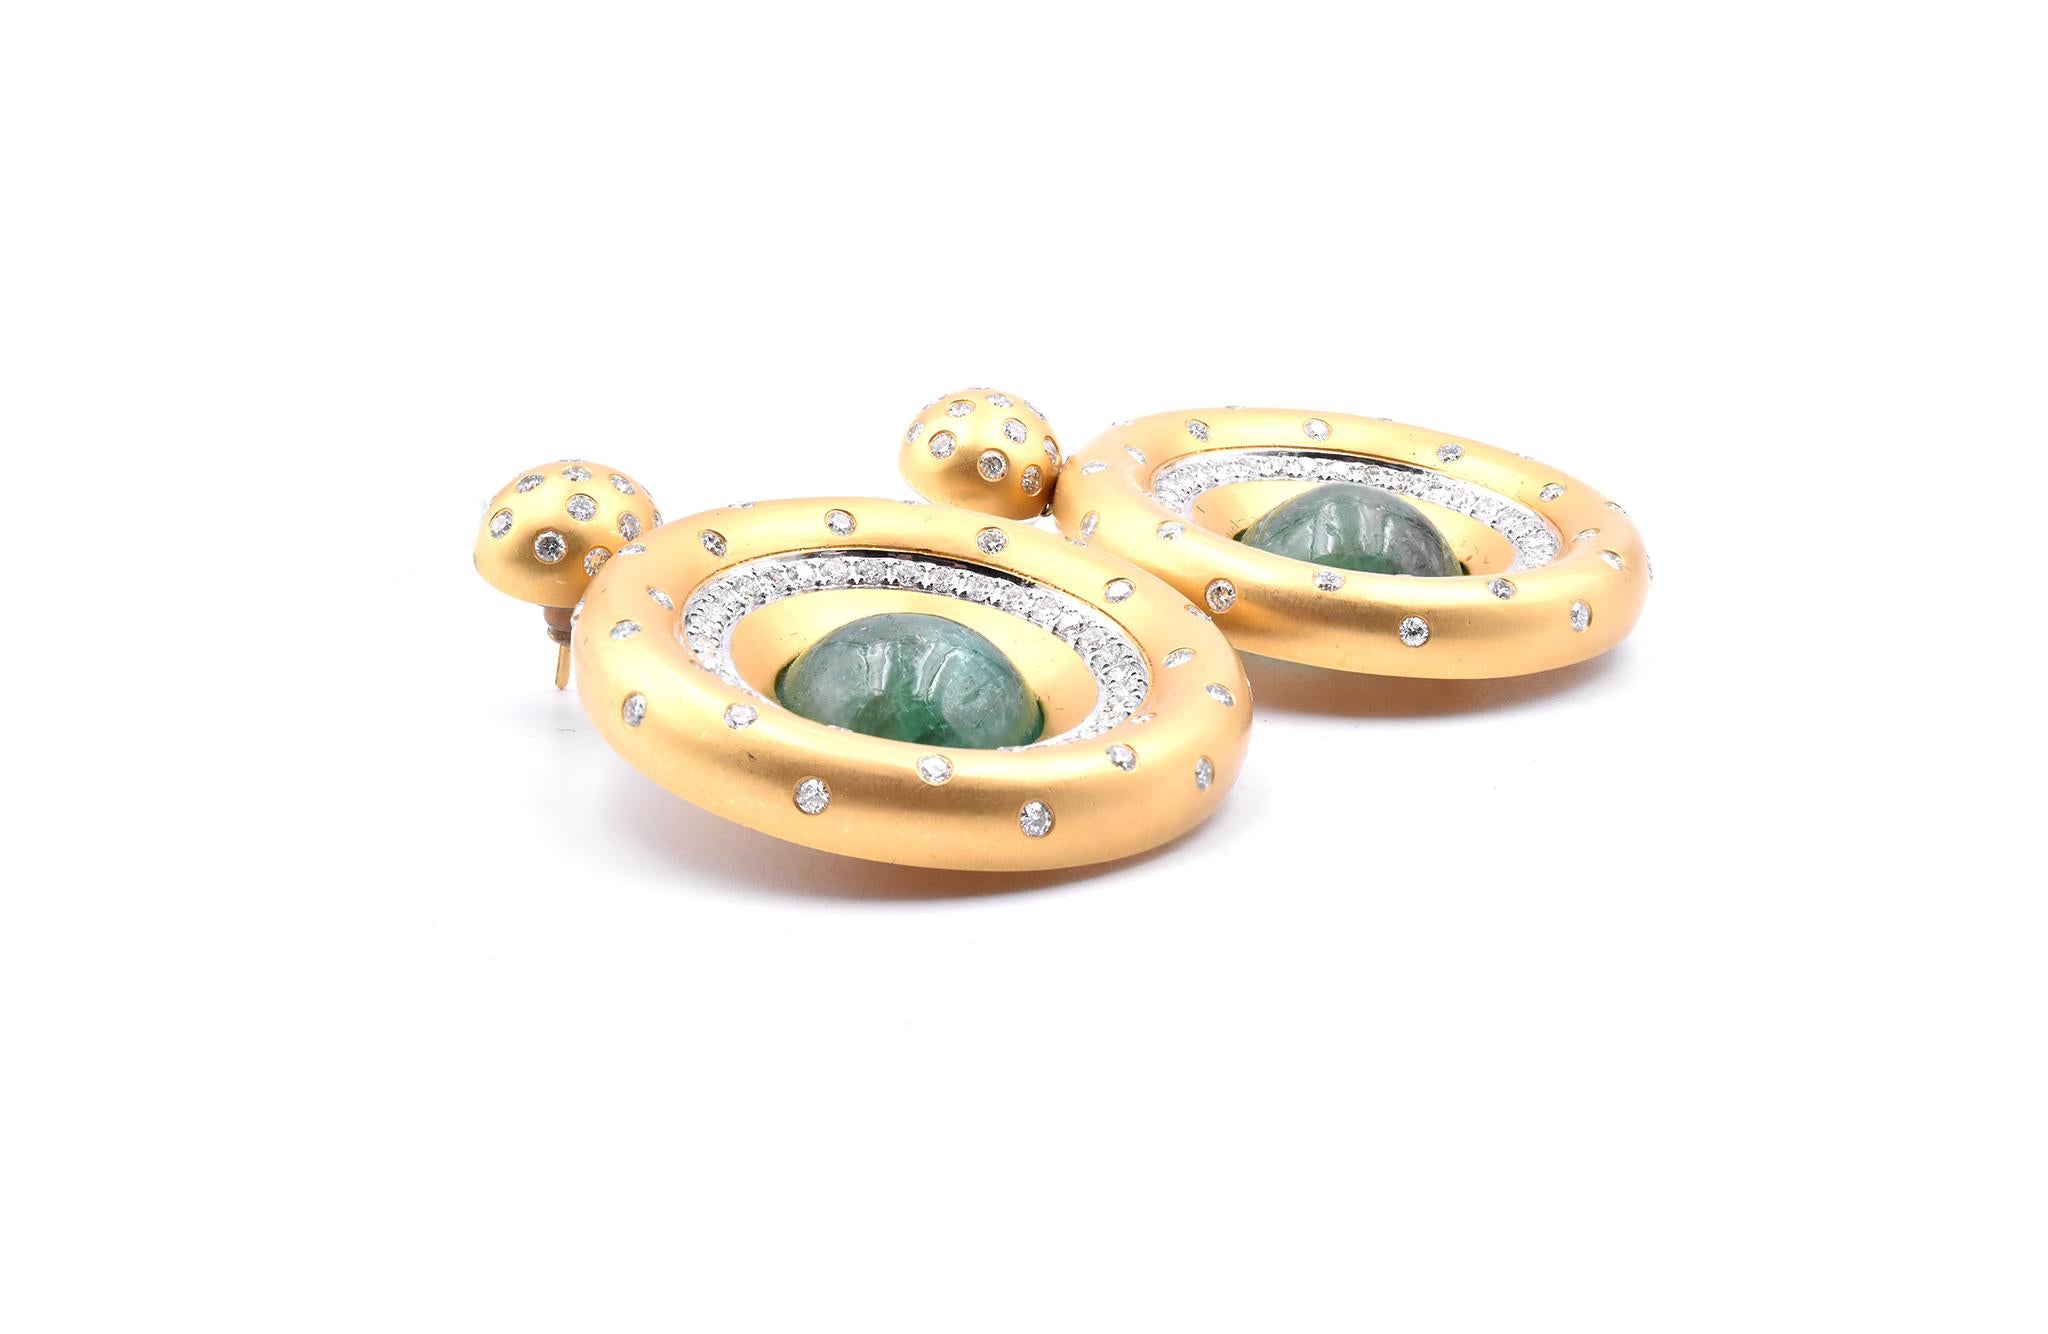 Material: 18K yellow gold
Emerald: 2 cabochon cut: 44.6cttw
Diamonds: 5.97cttw round cut
Color: G
Clarity: VS
Dimensions: earrings measure 56.13mm in diameter
Fastenings: post with friction back
Weight: 44.01 grams